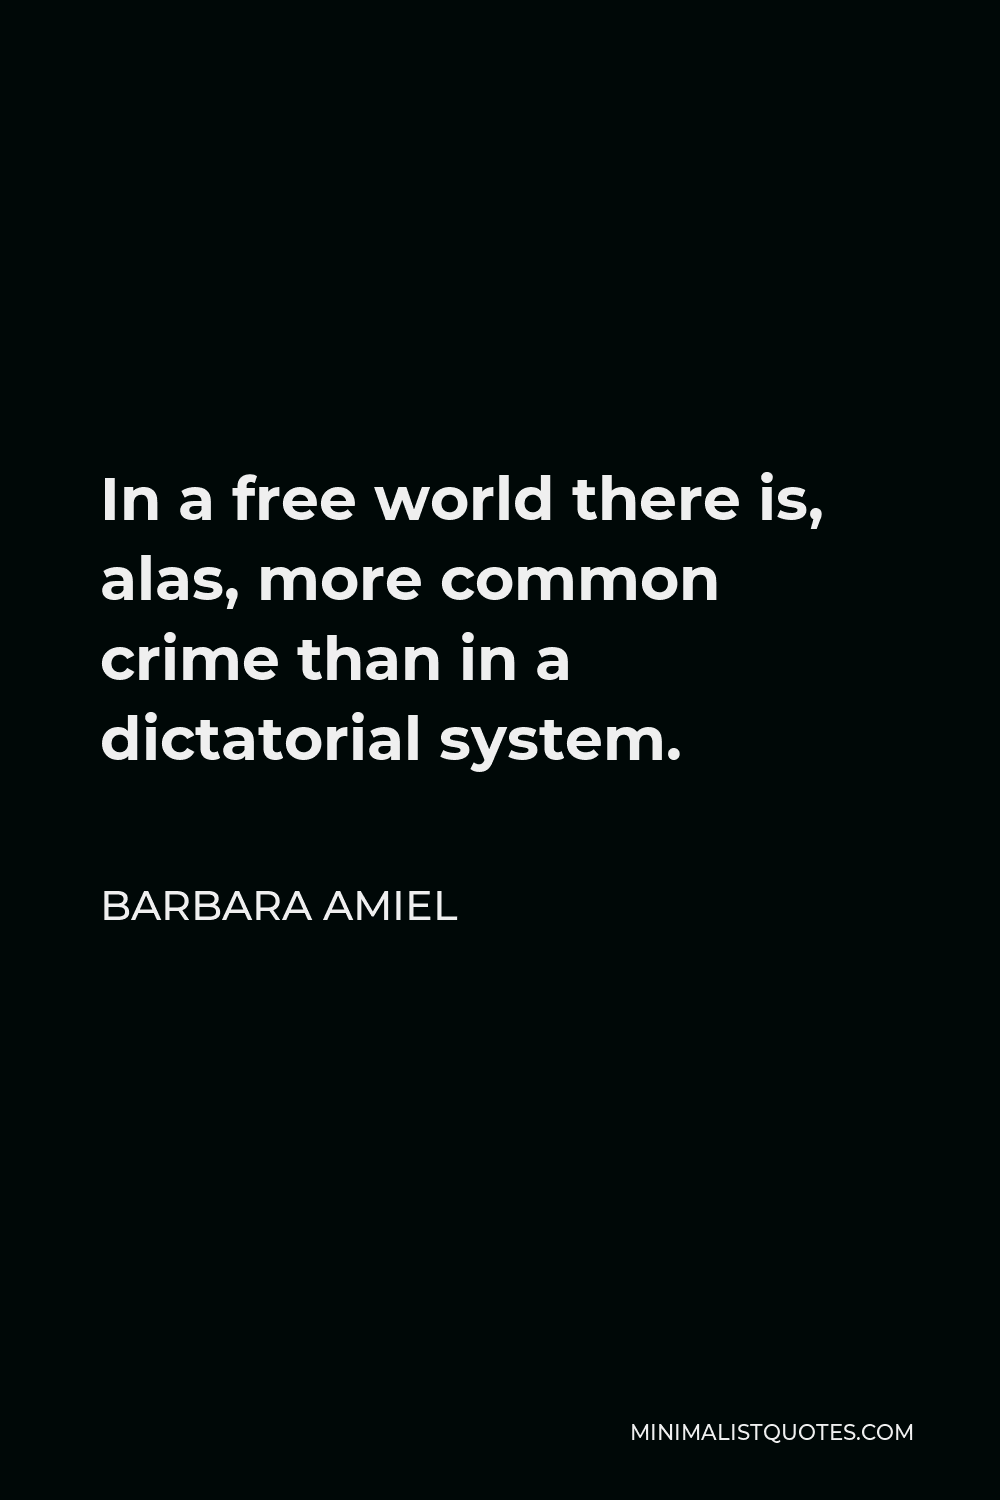 Barbara Amiel Quote - In a free world there is, alas, more common crime than in a dictatorial system.